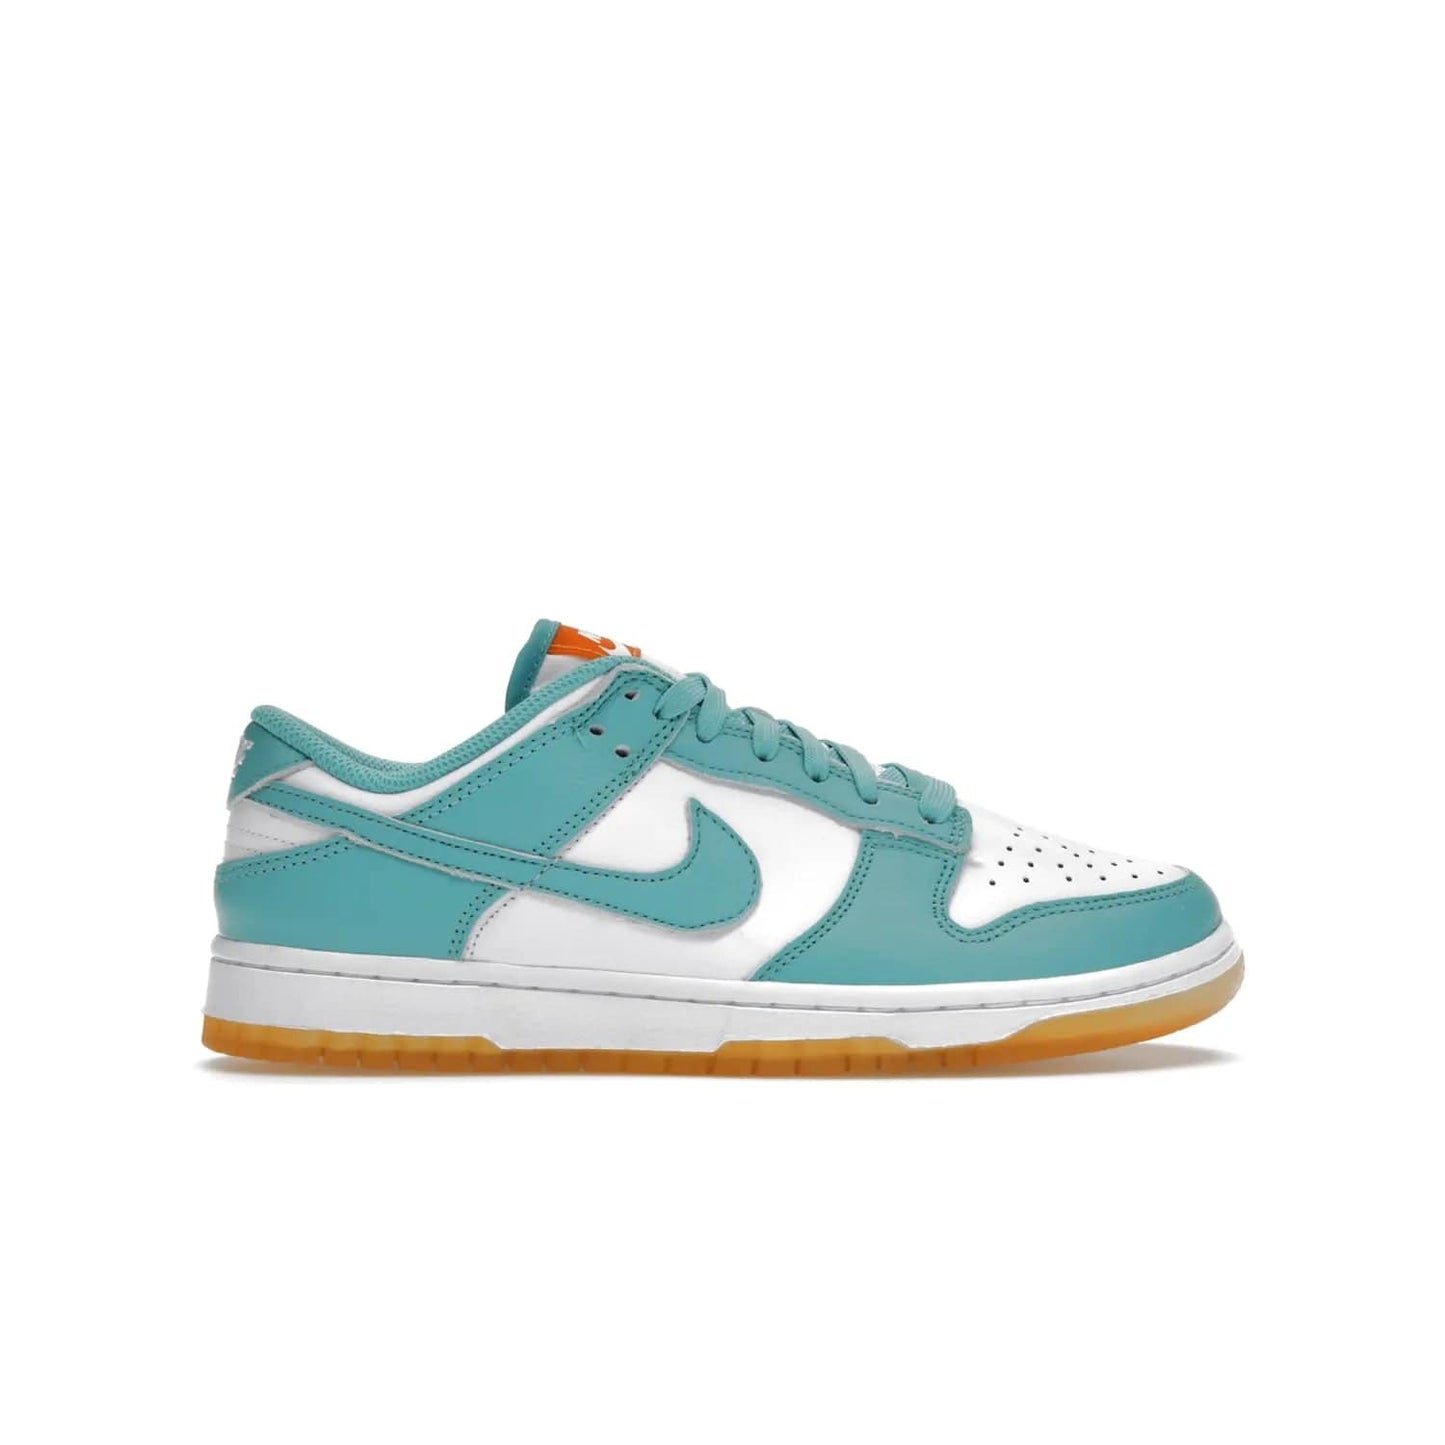 Nike Dunk Low Teal Zeal (Women's) - Image 1 - Only at www.BallersClubKickz.com - A white leather upper with teal overlays and Swooshes, plus yellow and embroidered accents make the Nike Dunk Low Teal Zeal (Women's) the perfect statement piece for any wardrobe.